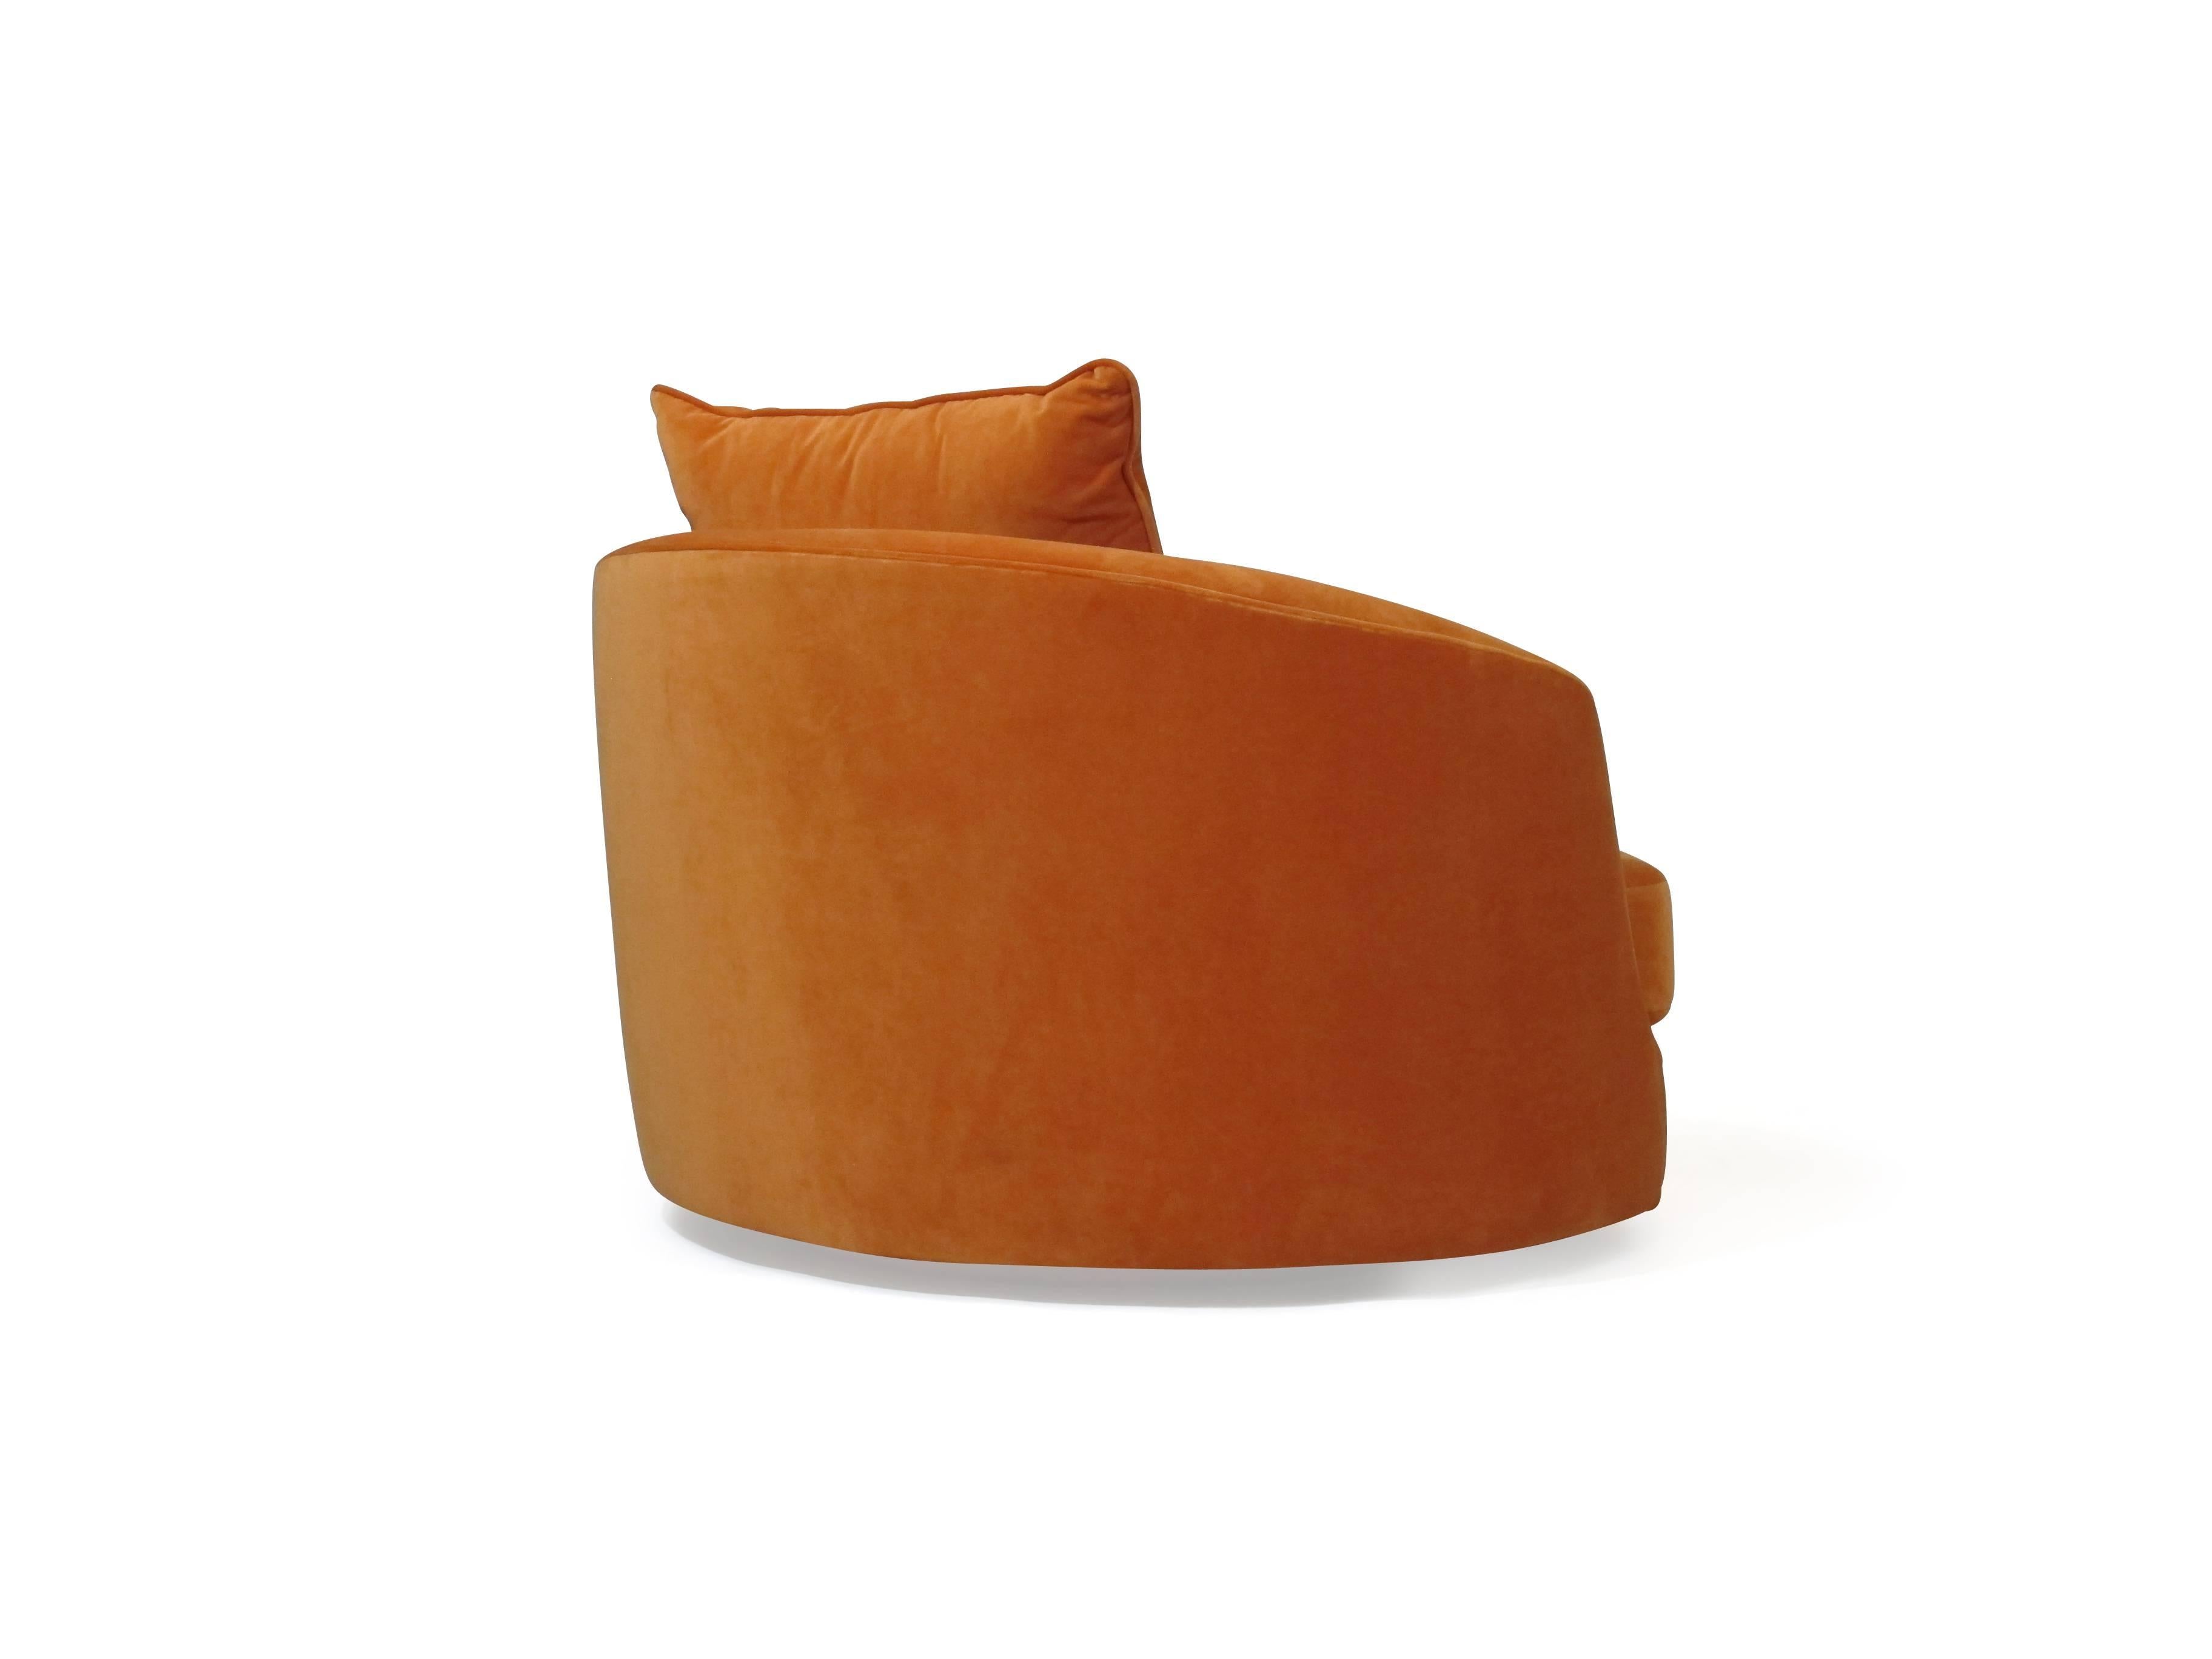 Hand-Crafted Milo Baughman for Thayer Coggin Swivel Tub Chair Available in COM For Sale